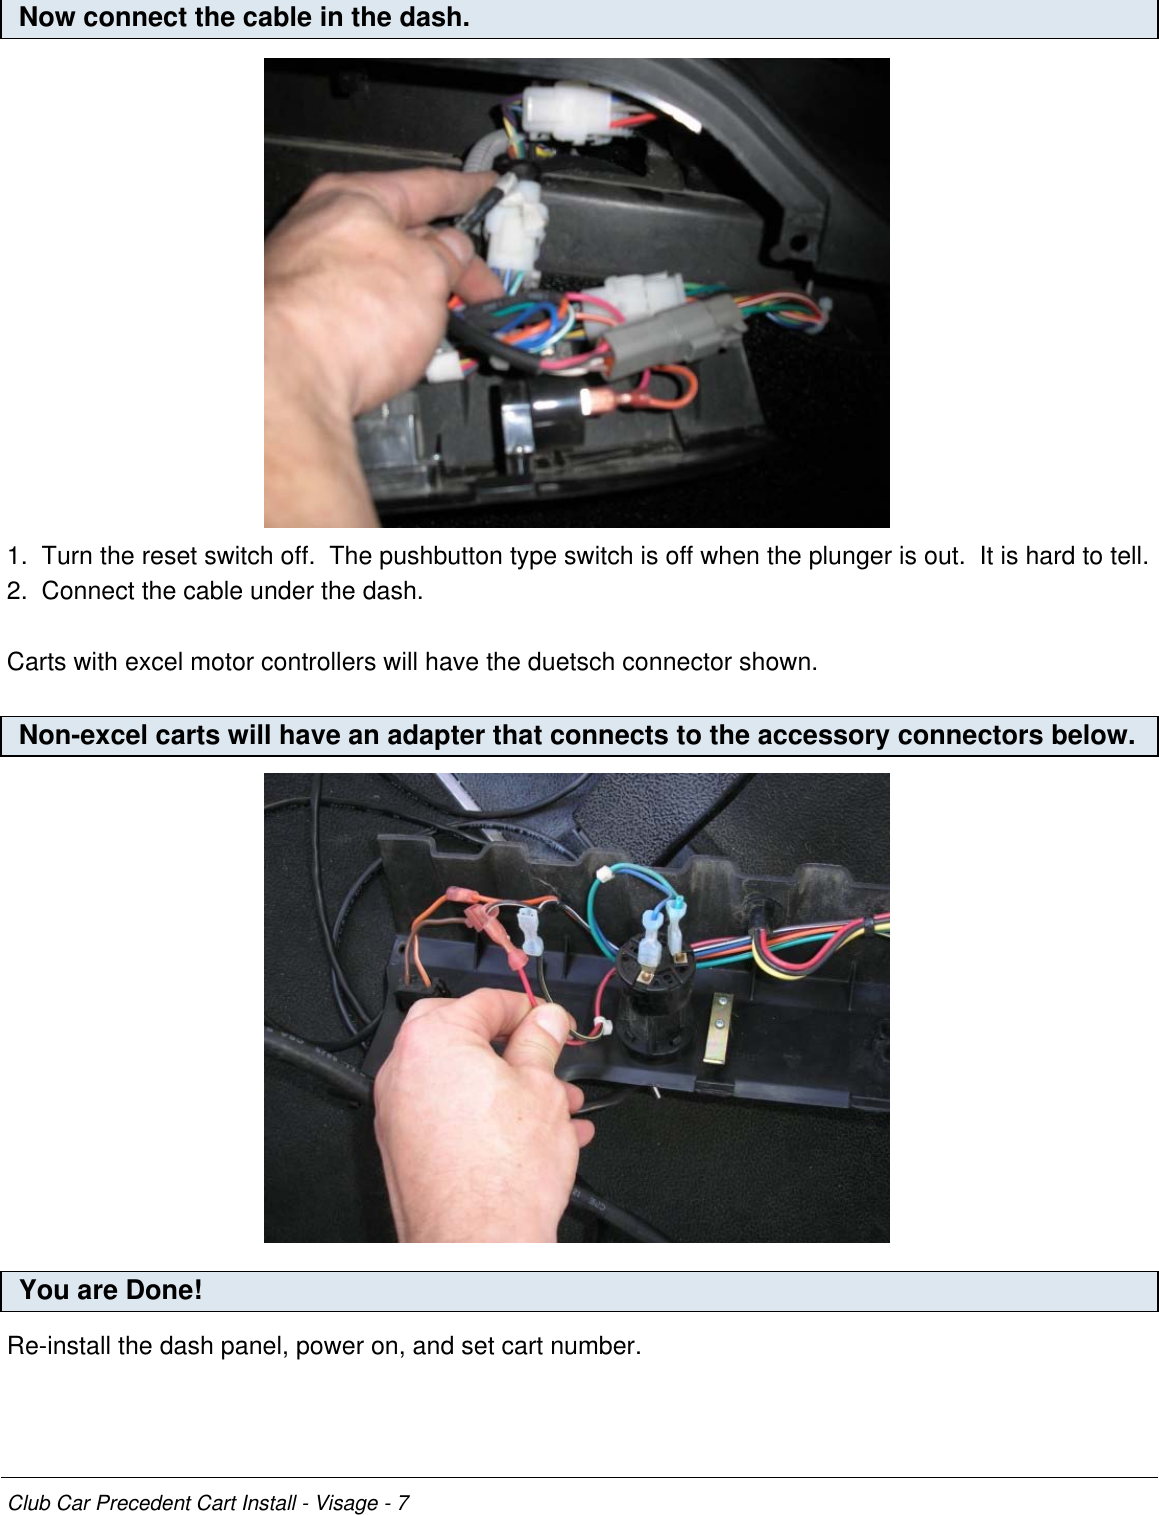 Now connect the cable in the dash.1.  Turn the reset switch off.  The pushbutton type switch is off when the plunger is out.  It is hard to tell.2.  Connect the cable under the dash.Carts with excel motor controllers will have the duetsch connector shown.Non-excel carts will have an adapter that connects to the accessory connectors below.You are Done!Re-install the dash panel, power on, and set cart number.Club Car Precedent Cart Install - Visage - 7